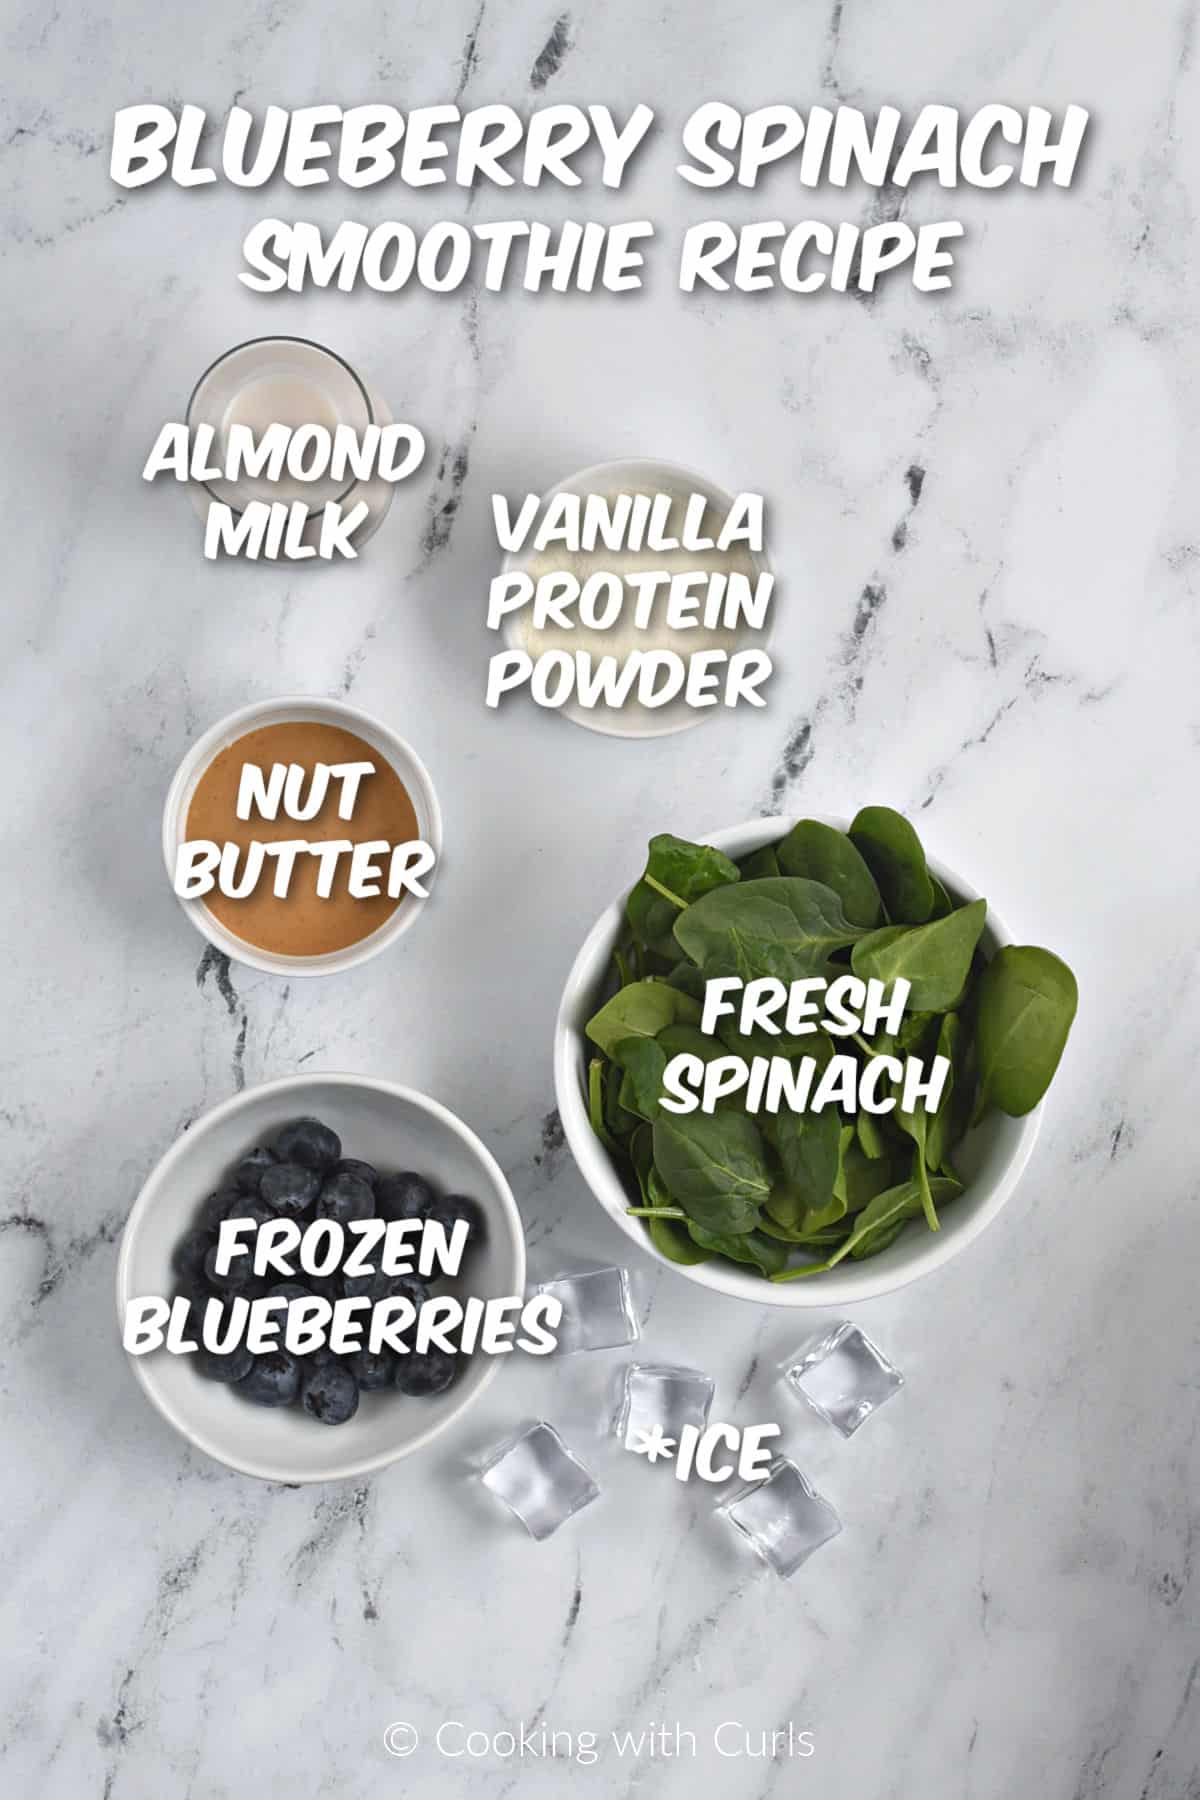 Ingredients to make blueberry spinach smoothie recipe.